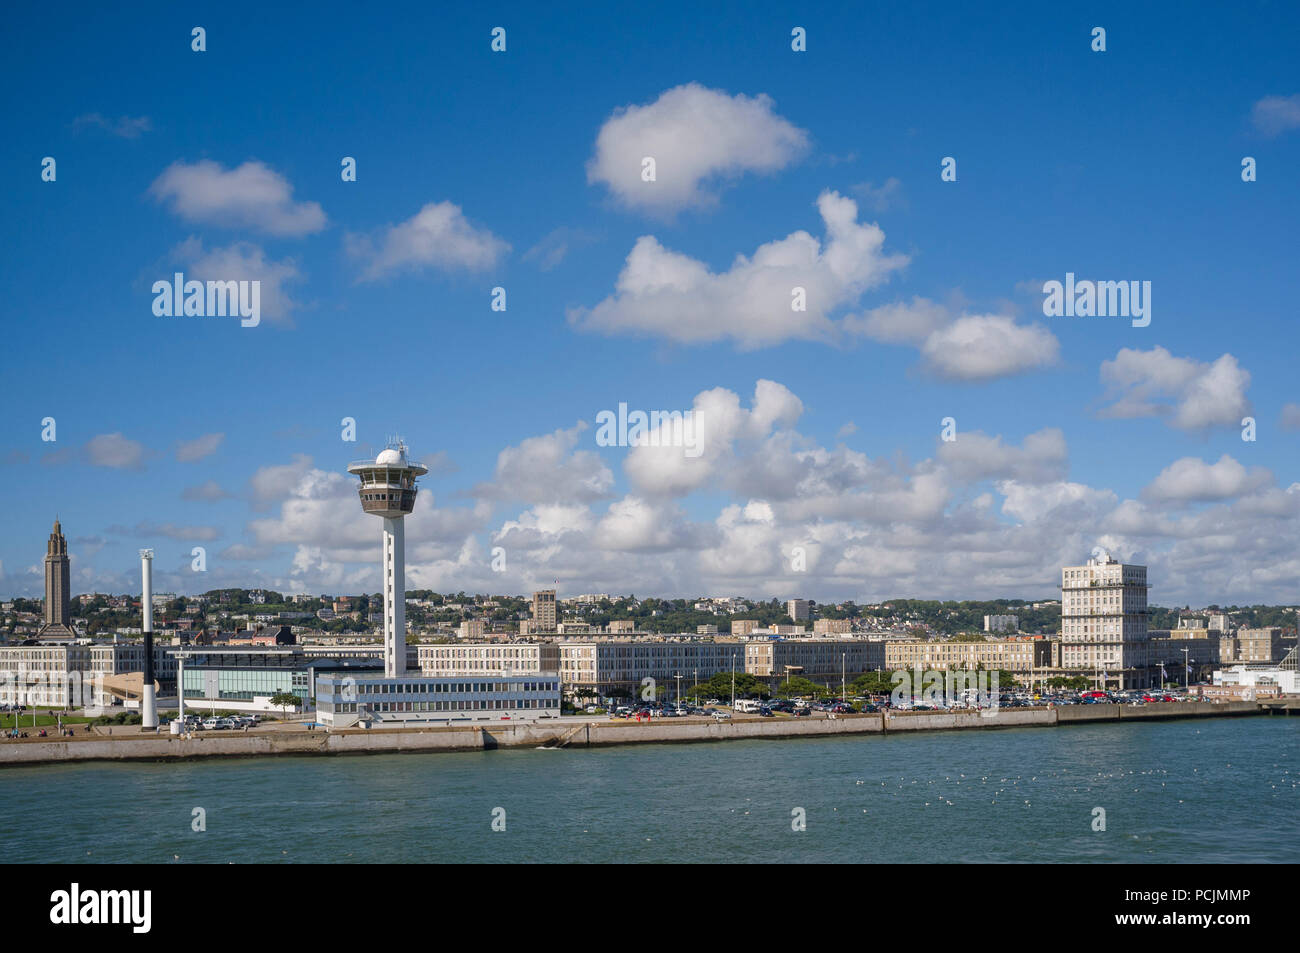 View of Le Havre from the sea showing the Musee Malraux and iconic apartments by Auguste Perret with blue sky and fluffy white cumulus clouds Stock Photo